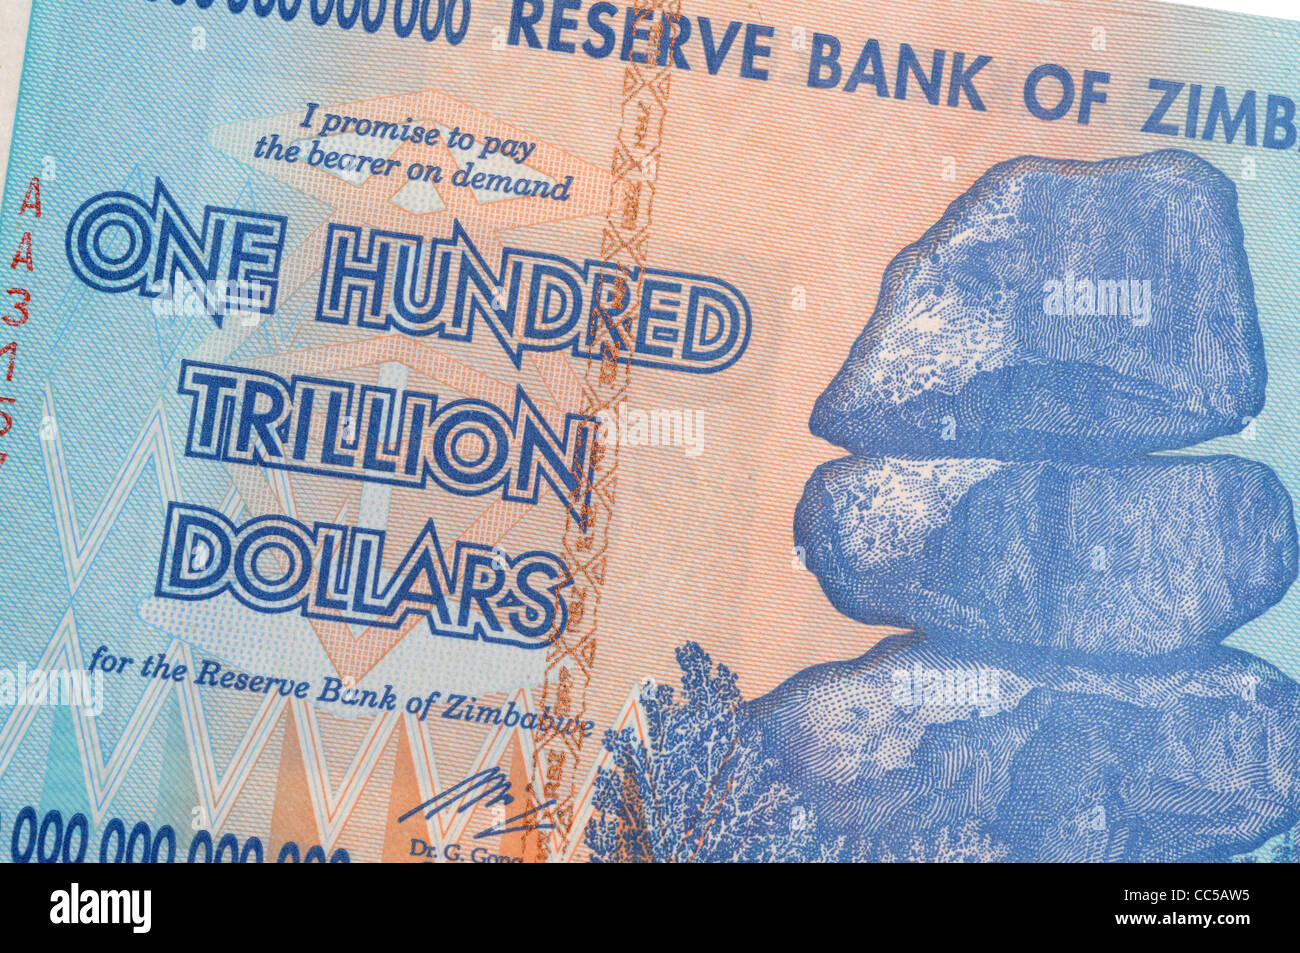 One Hundred Trillion Dollar Bank Note, One Hundred Trillion Dollar Zimbabwe Bank Note Stock Photo